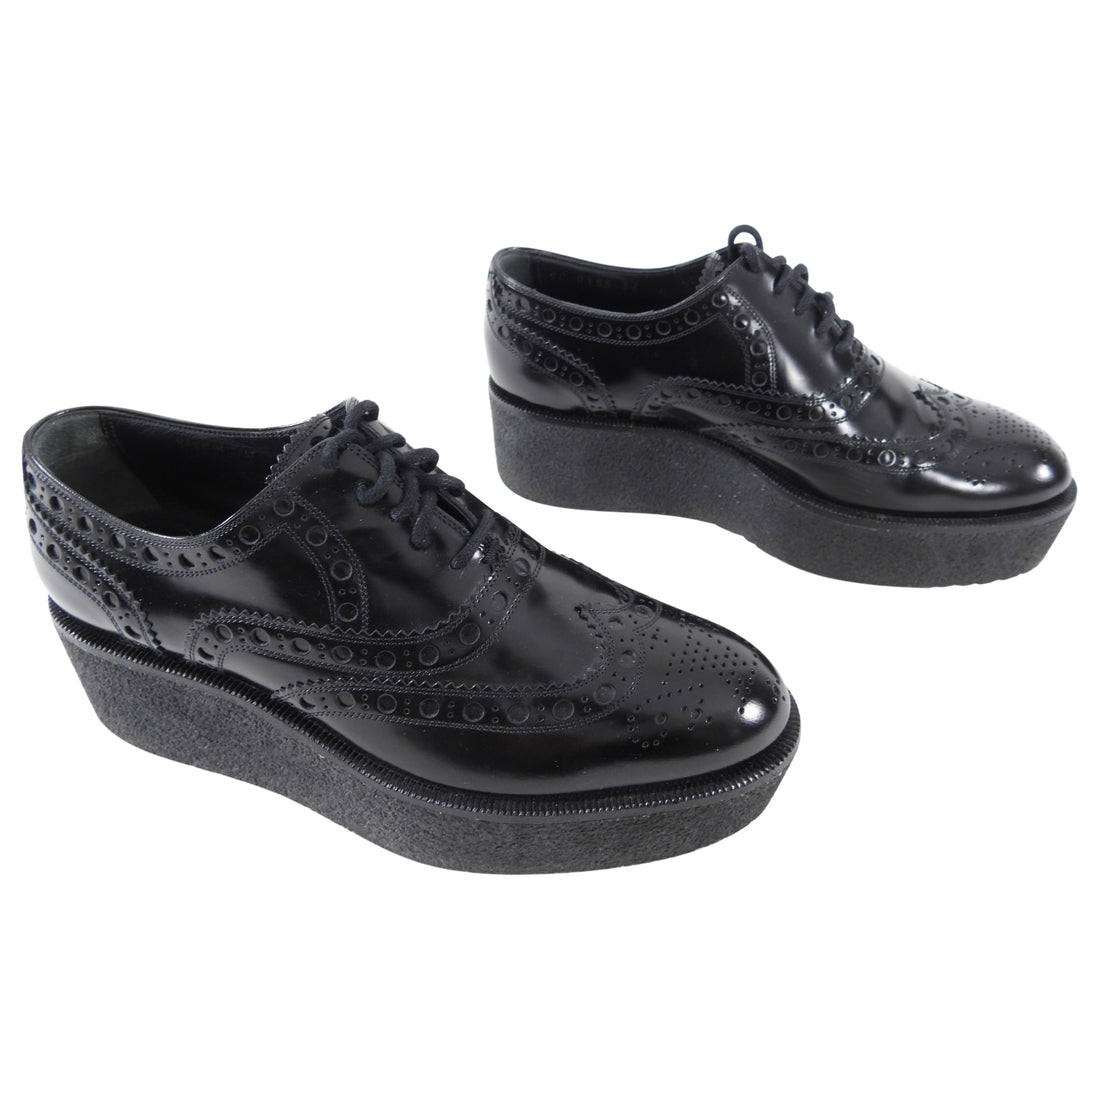 Louis Vuitton shoes in grained black leather and laces, brogue and